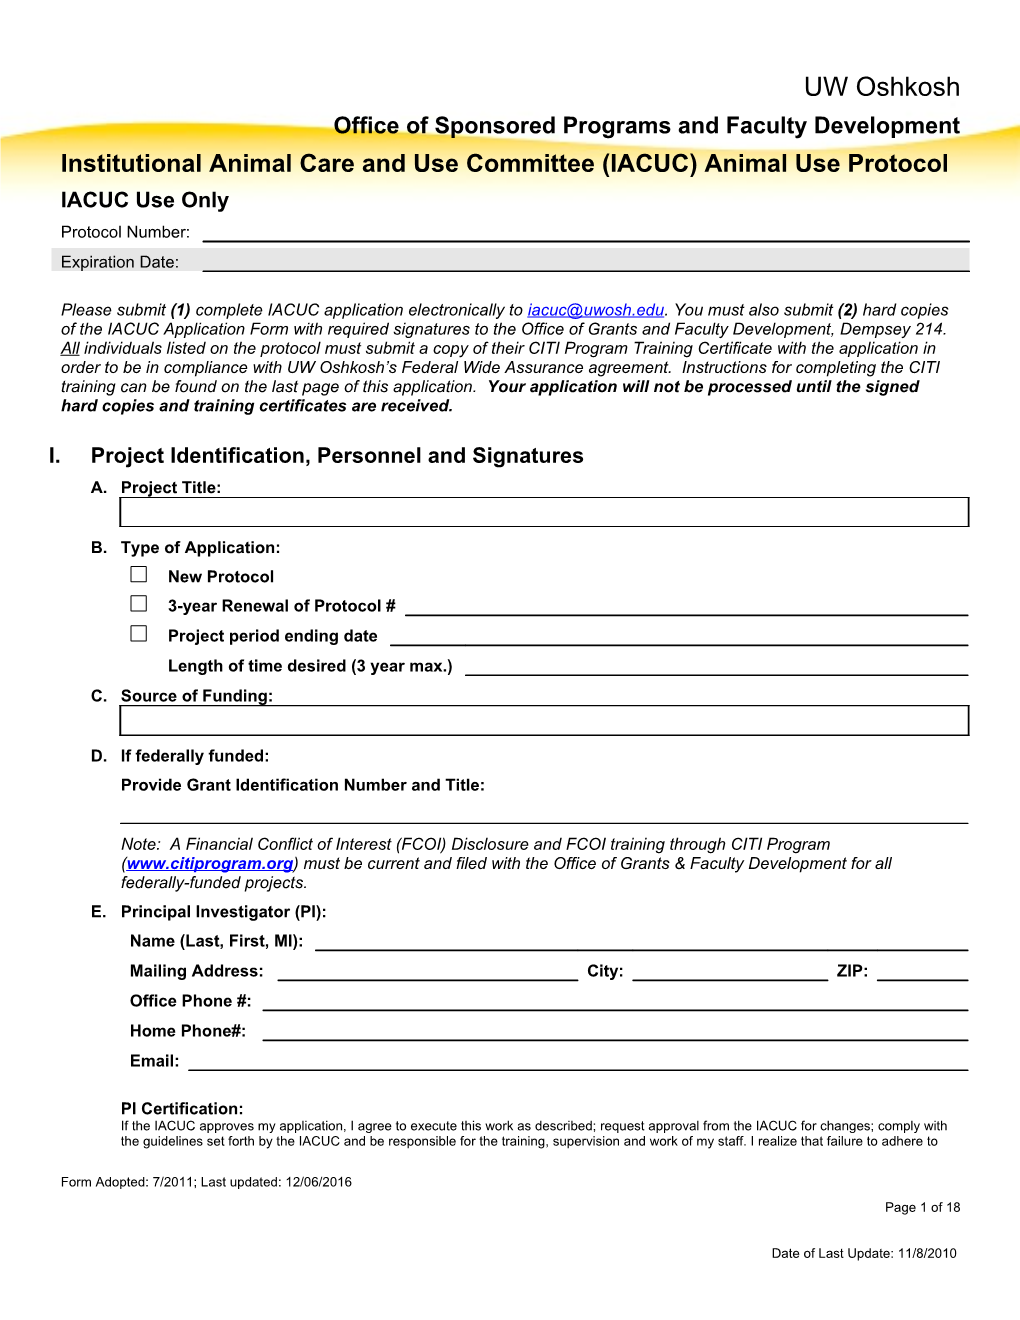 Institutional Animal Care and Use Committee (IACUC) Animal Use Protocol